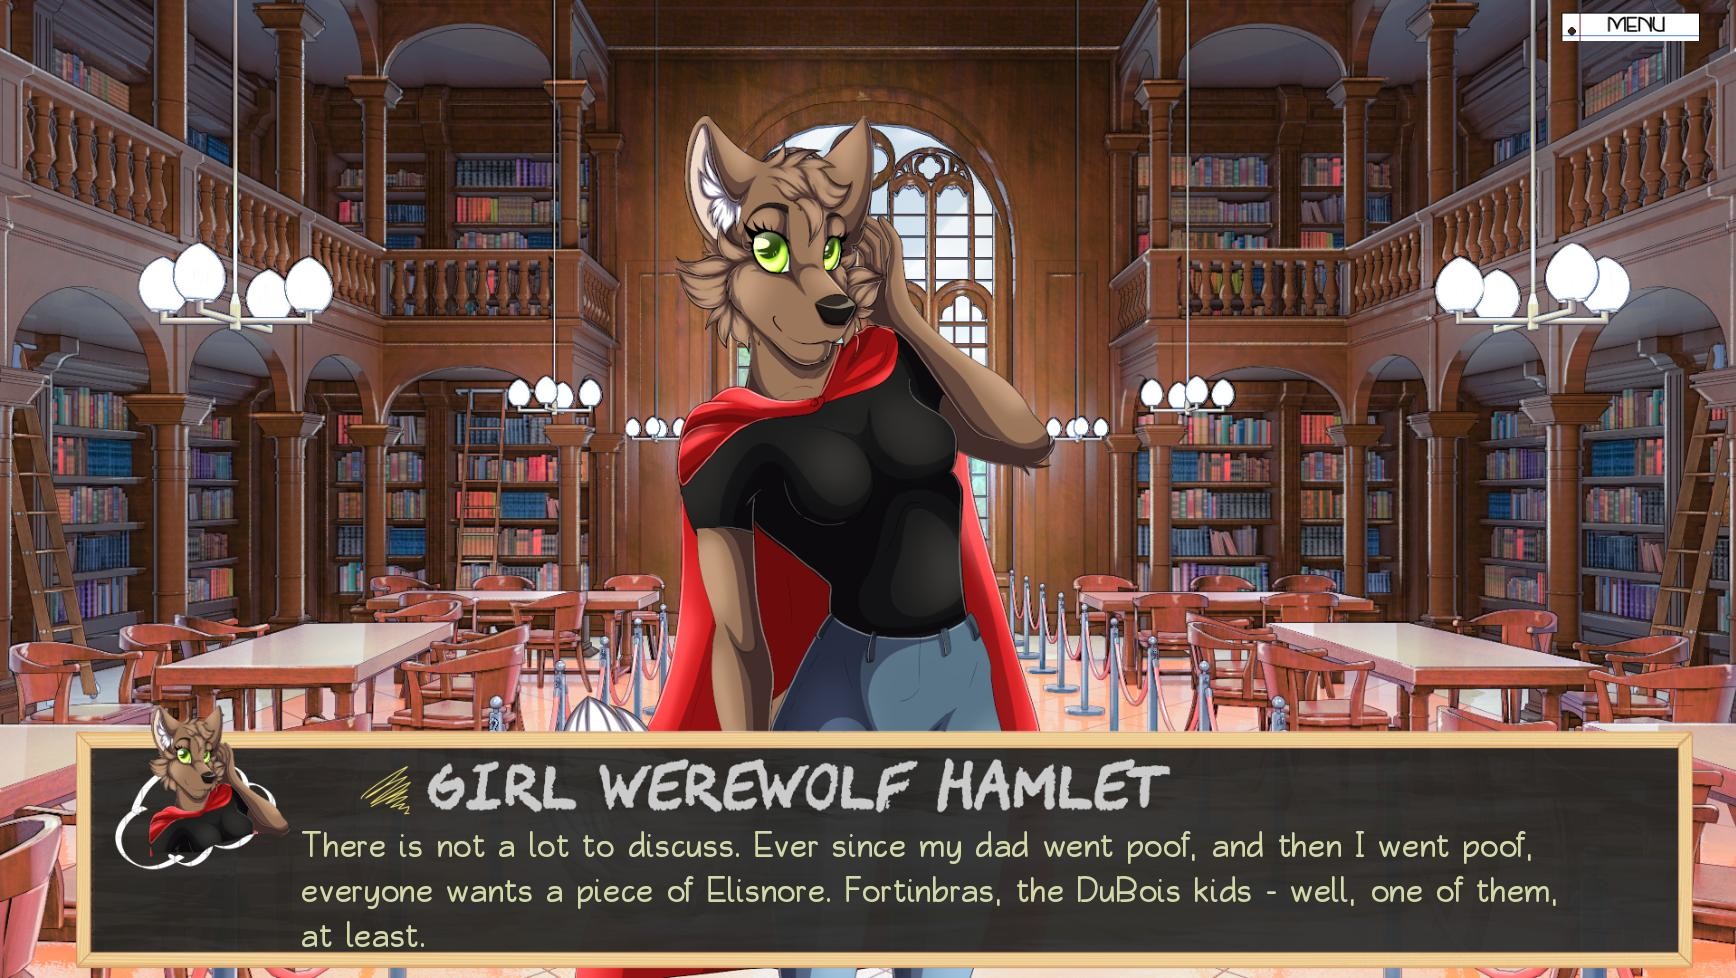 Furry Shakespeare: To Date Or Not To Date Spooky Cat Girls? screenshot